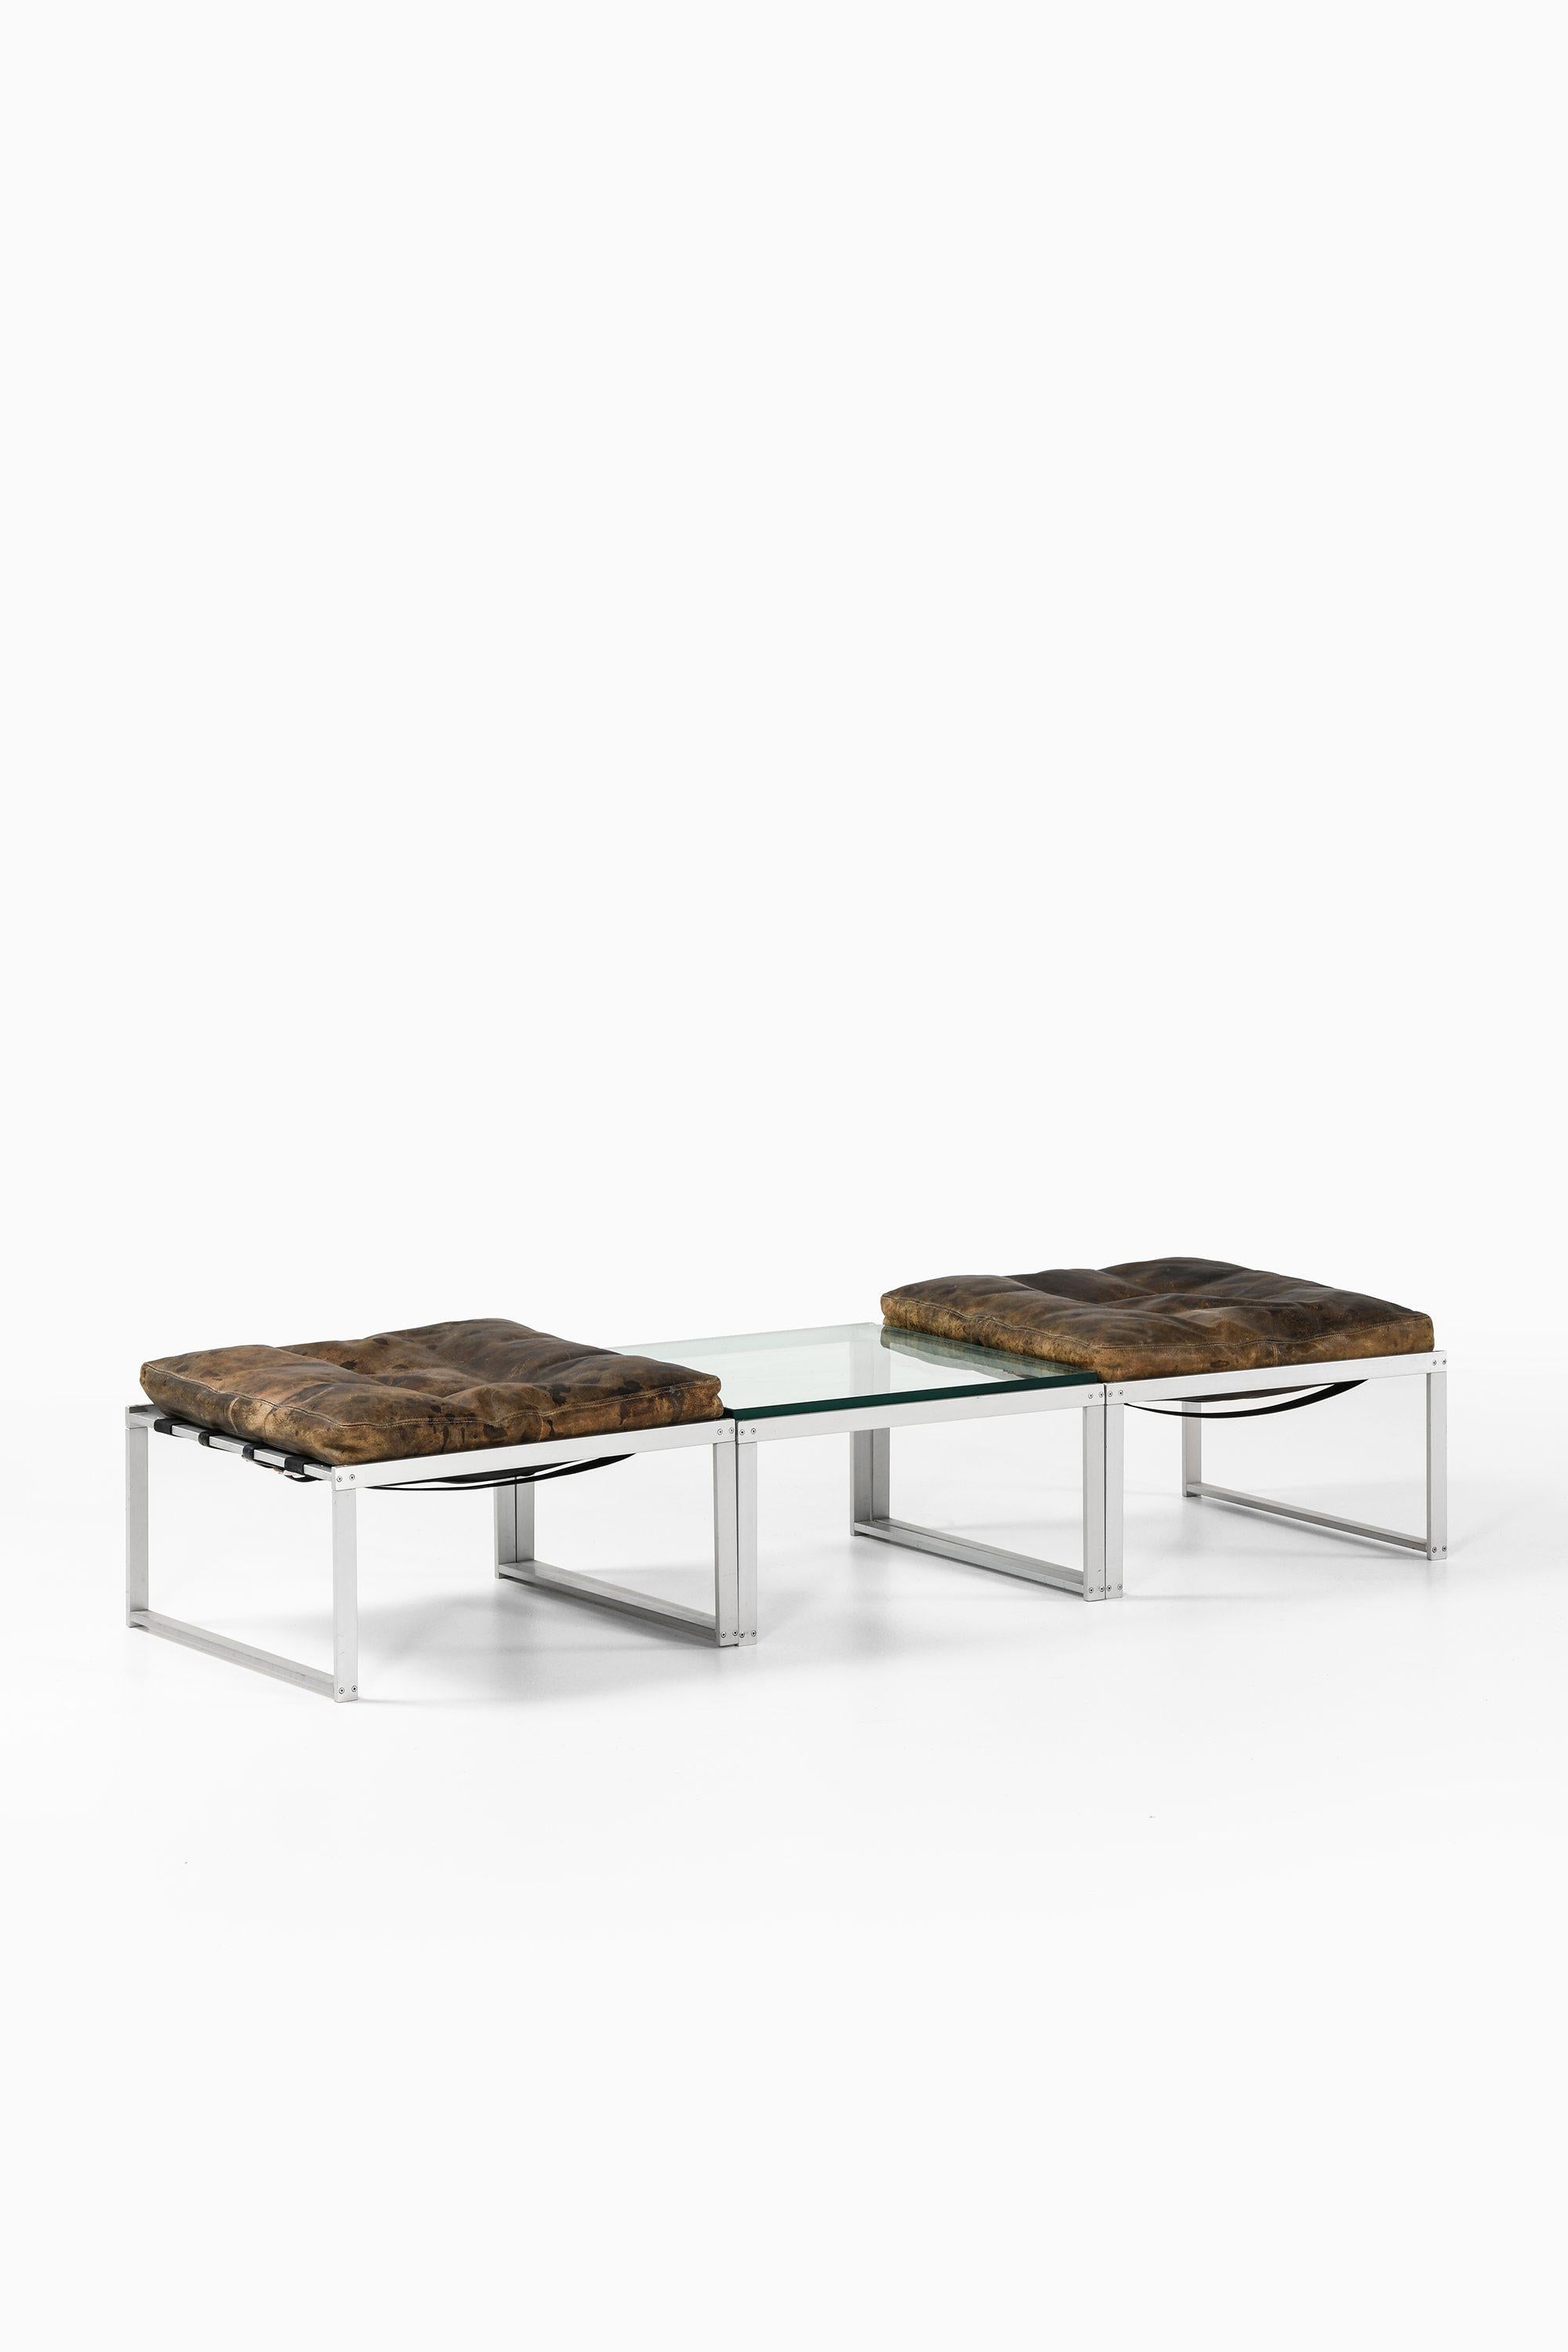 Set of 2 Stools & Side Table in Aluminium, Glass with Leather by Jørgen Højs, 1960's

Additional Information:
Material: Aluminium, glass and leather
Style: Mid century, Scandinavian
Produced by Niels Vitsøe in Denmark
Dimensions (W x D x H): 60 x 60